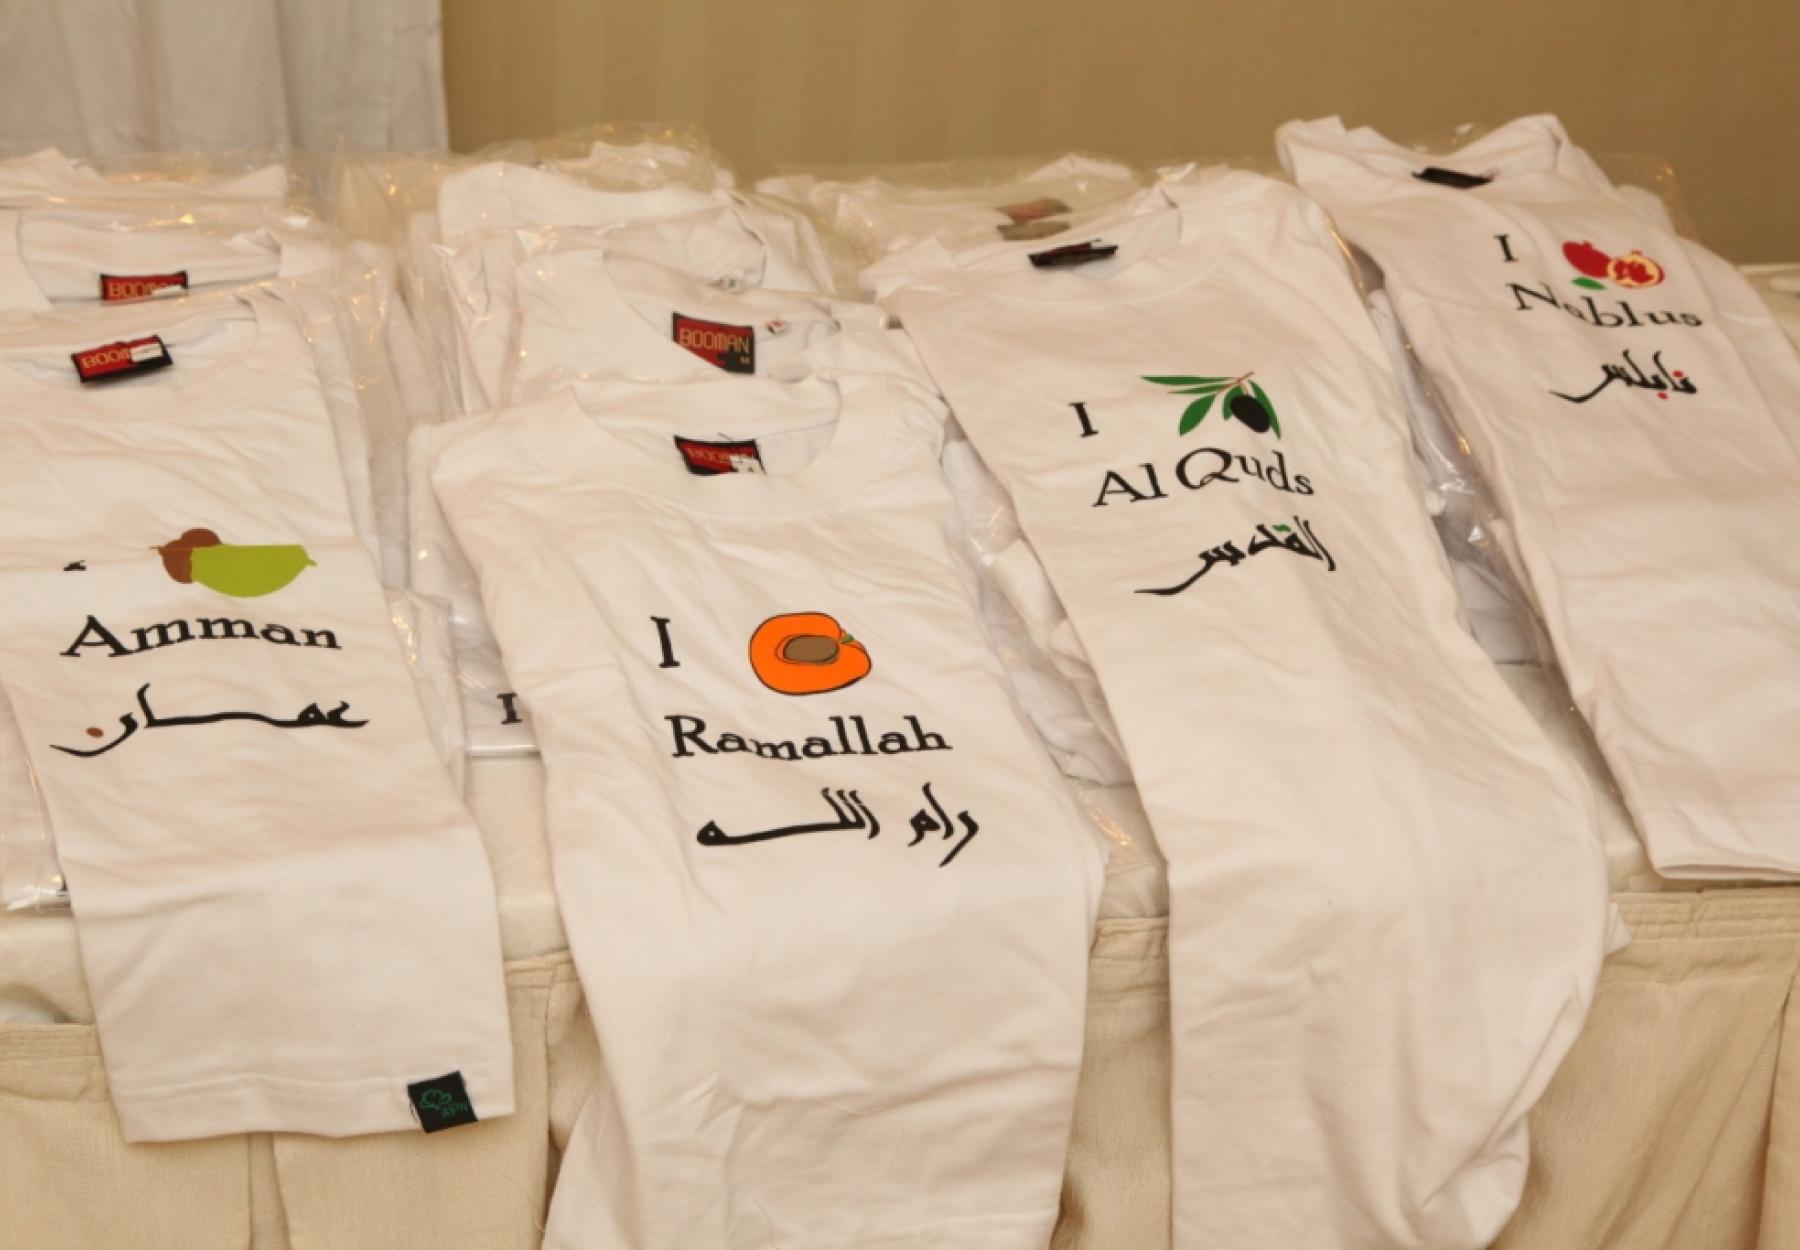 New Products: T-shirts of the Towns and Cities of Palestine